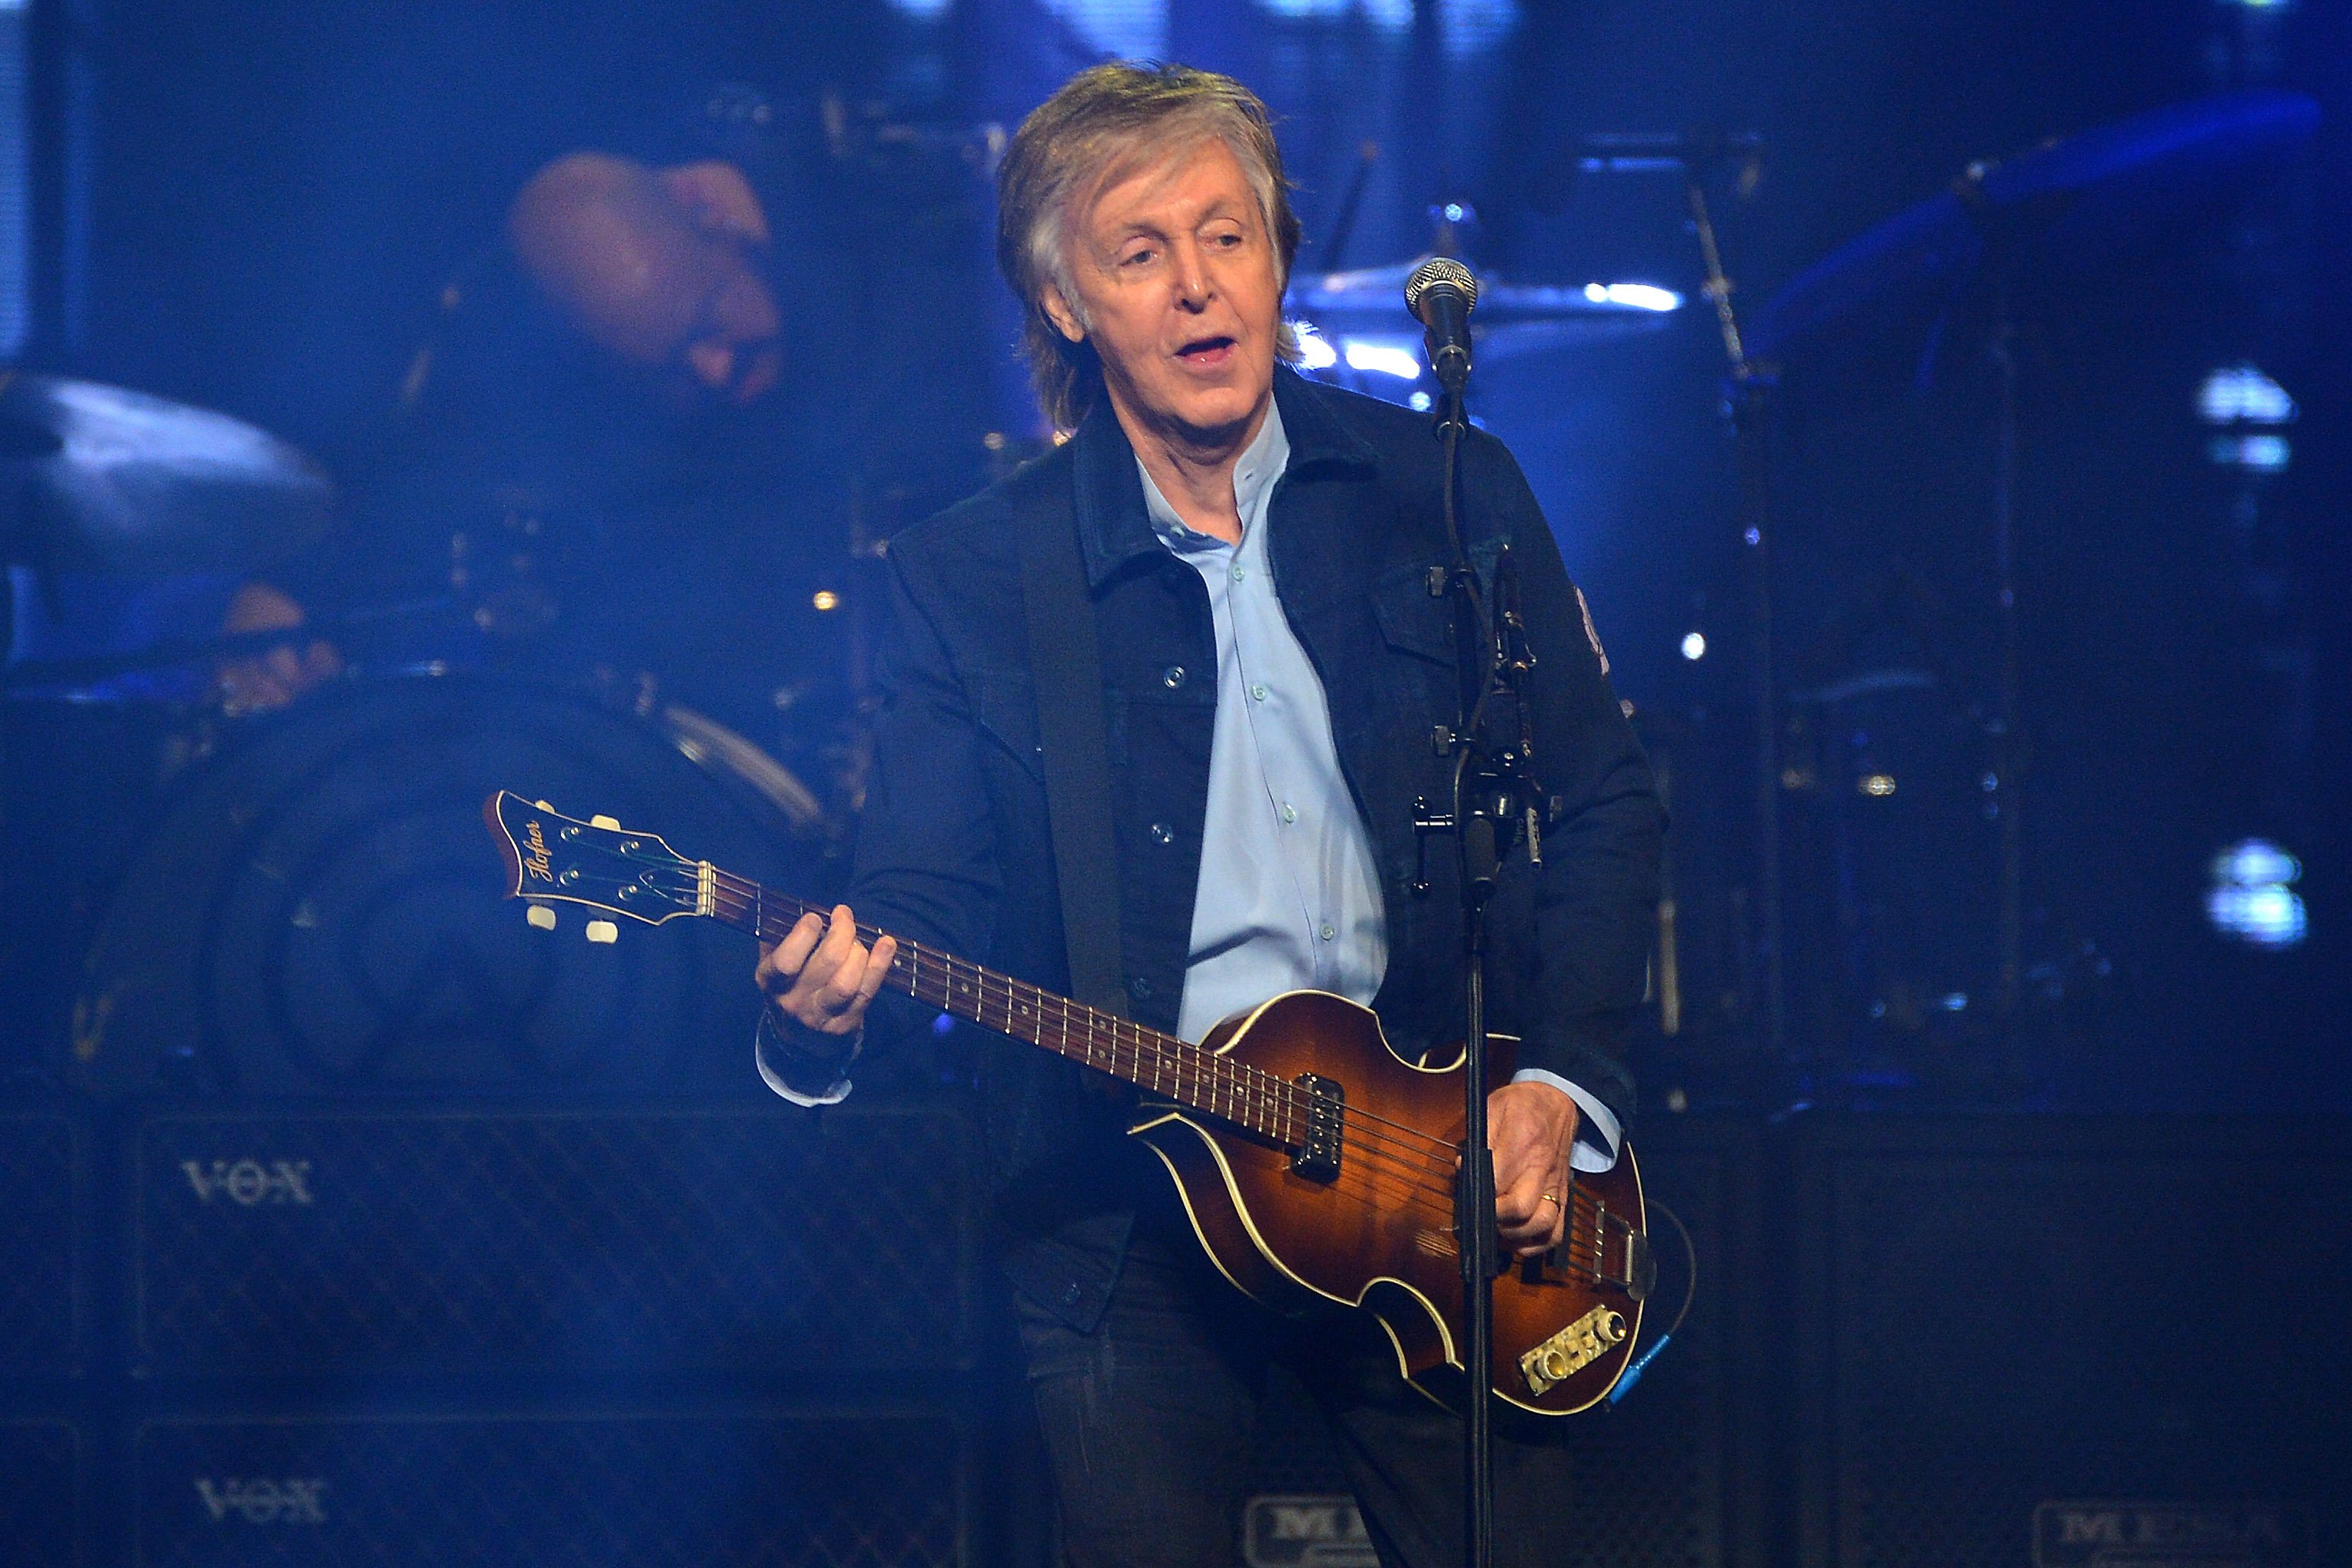 Paul McCartney performs at the O2 Arena in London, England in 2018